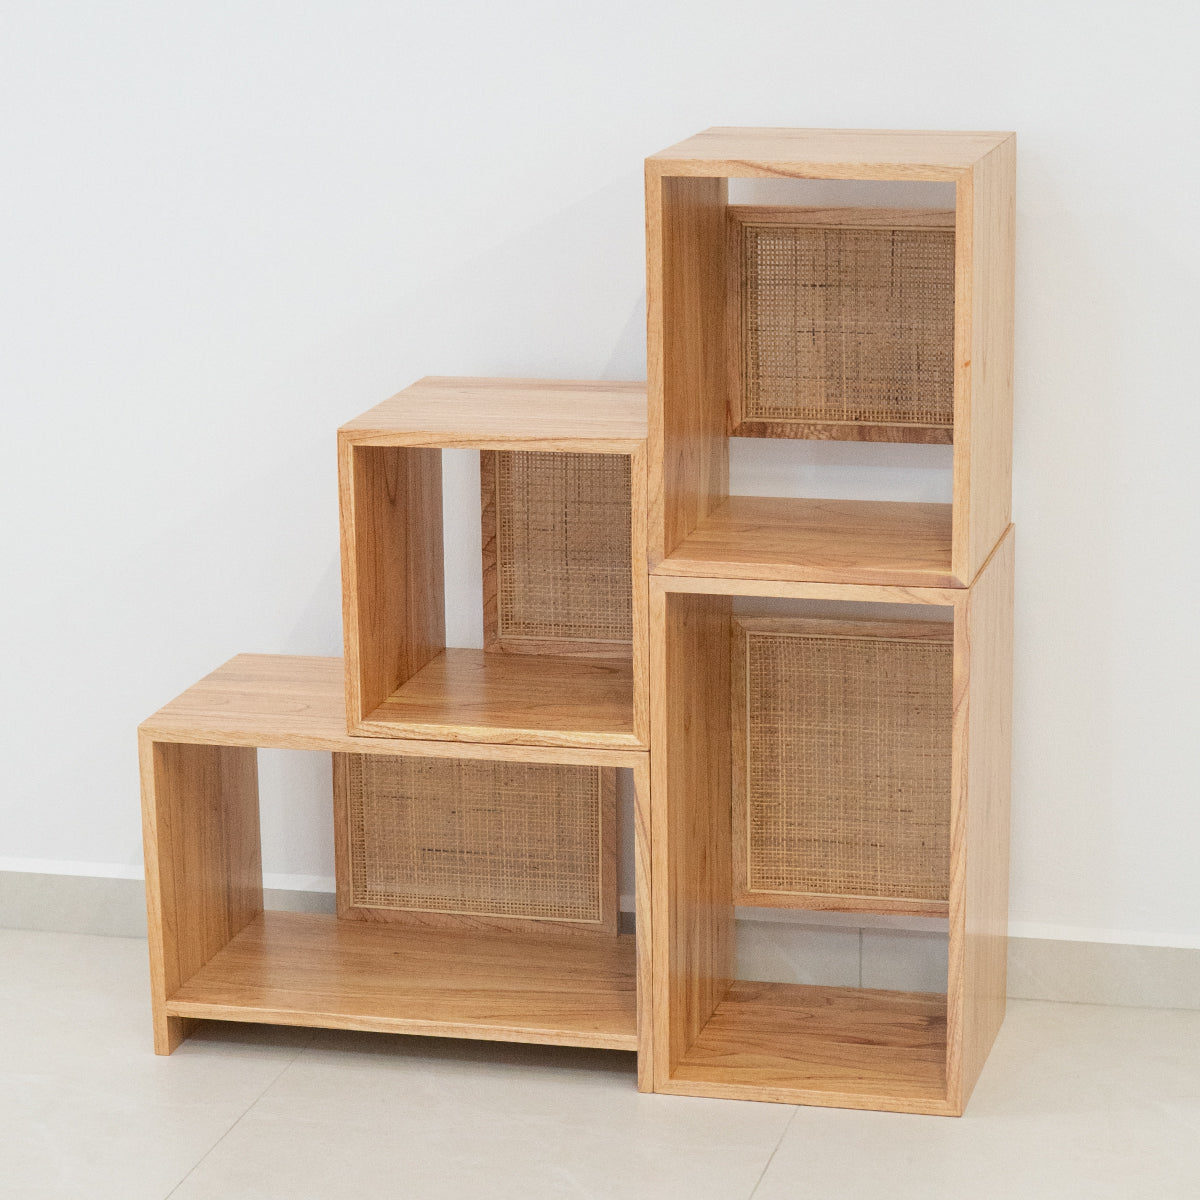 Summer's Modular Stackable Storage & Display Cases | Kathy's Cove Singapore